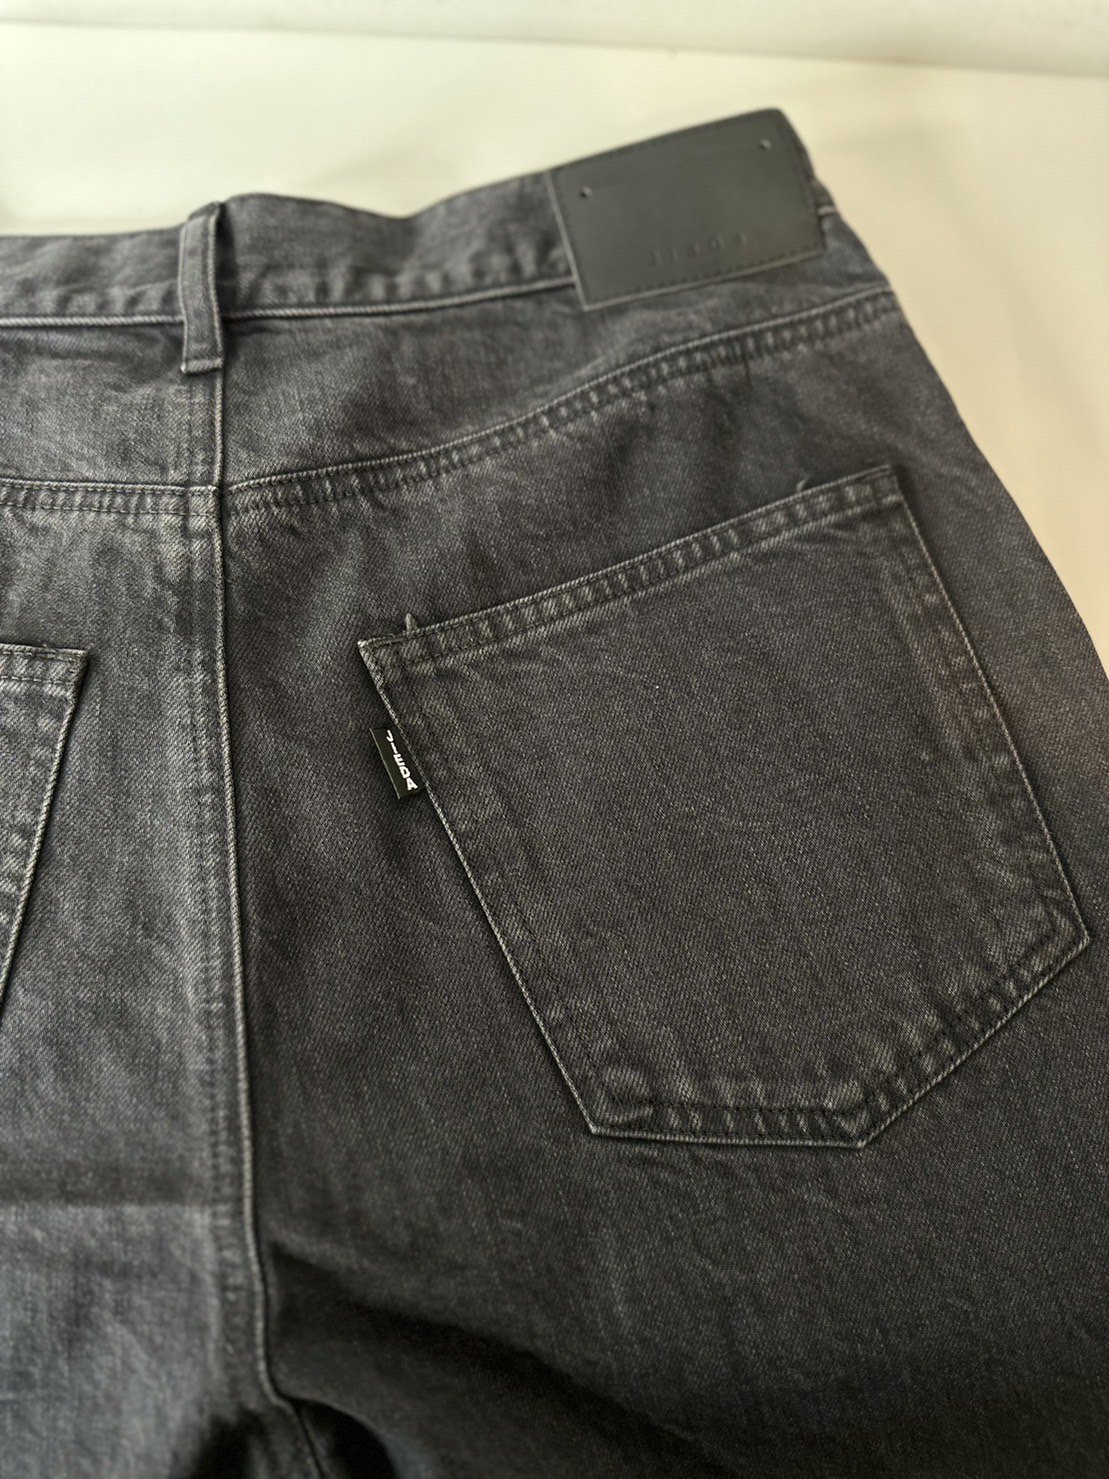 JieDa<br />CUTTING WIDE DENIM / BLACK<img class='new_mark_img2' src='https://img.shop-pro.jp/img/new/icons47.gif' style='border:none;display:inline;margin:0px;padding:0px;width:auto;' />